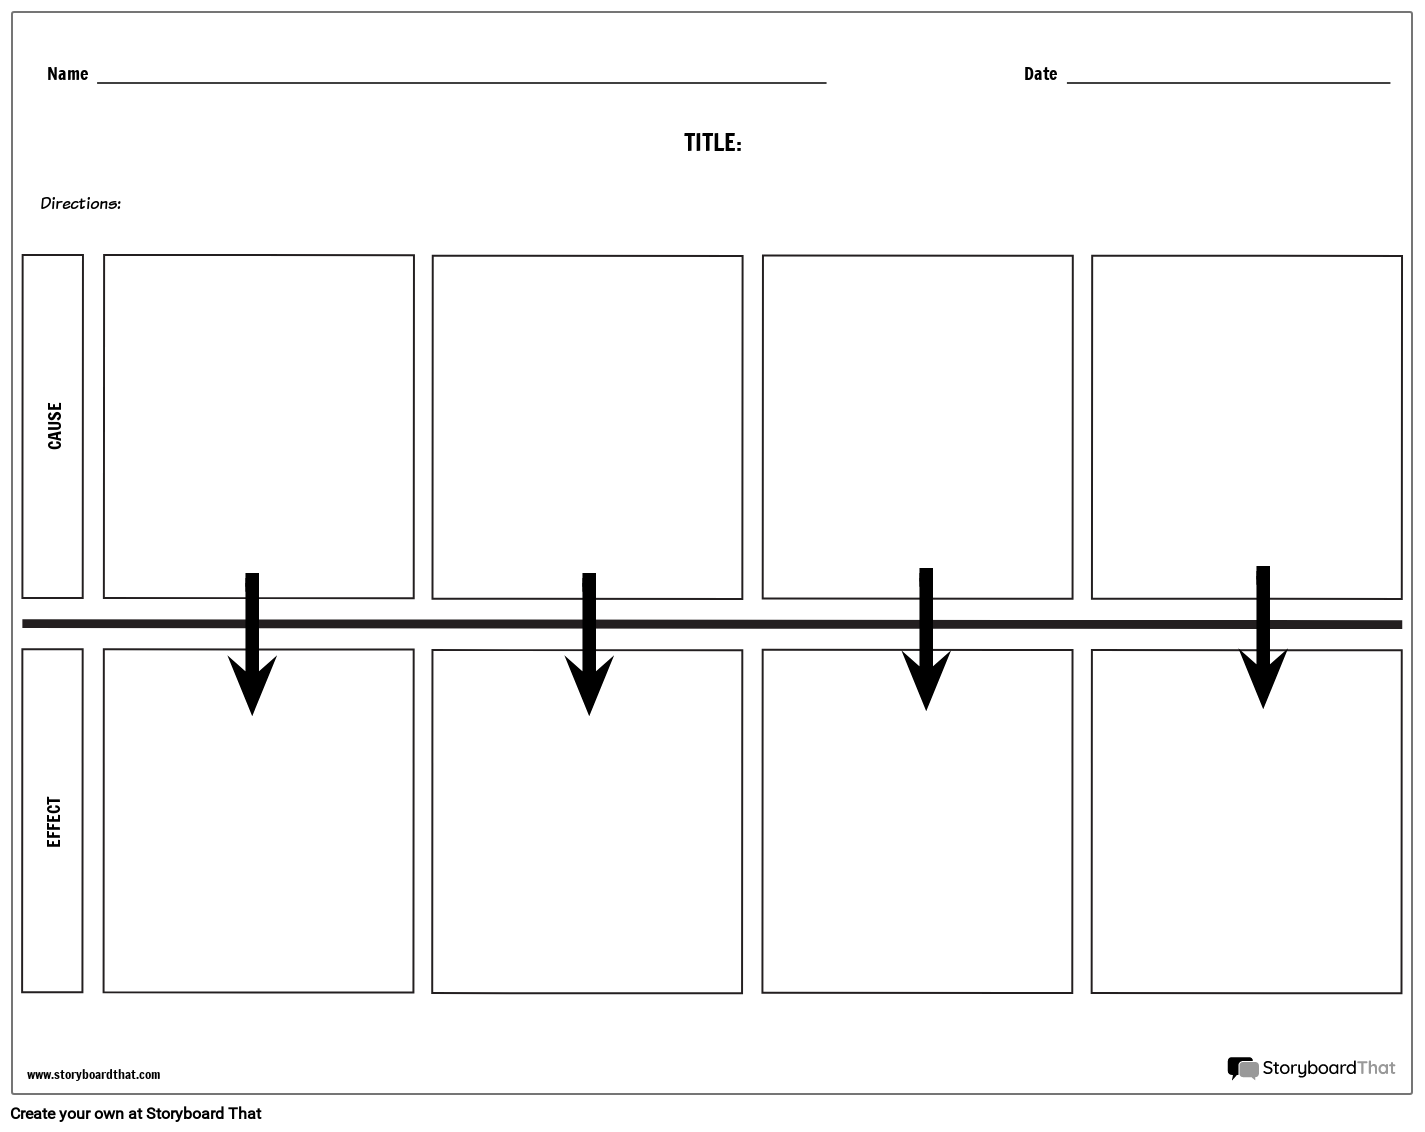 Cause and Effect Worksheet with 8 Empty Boxes